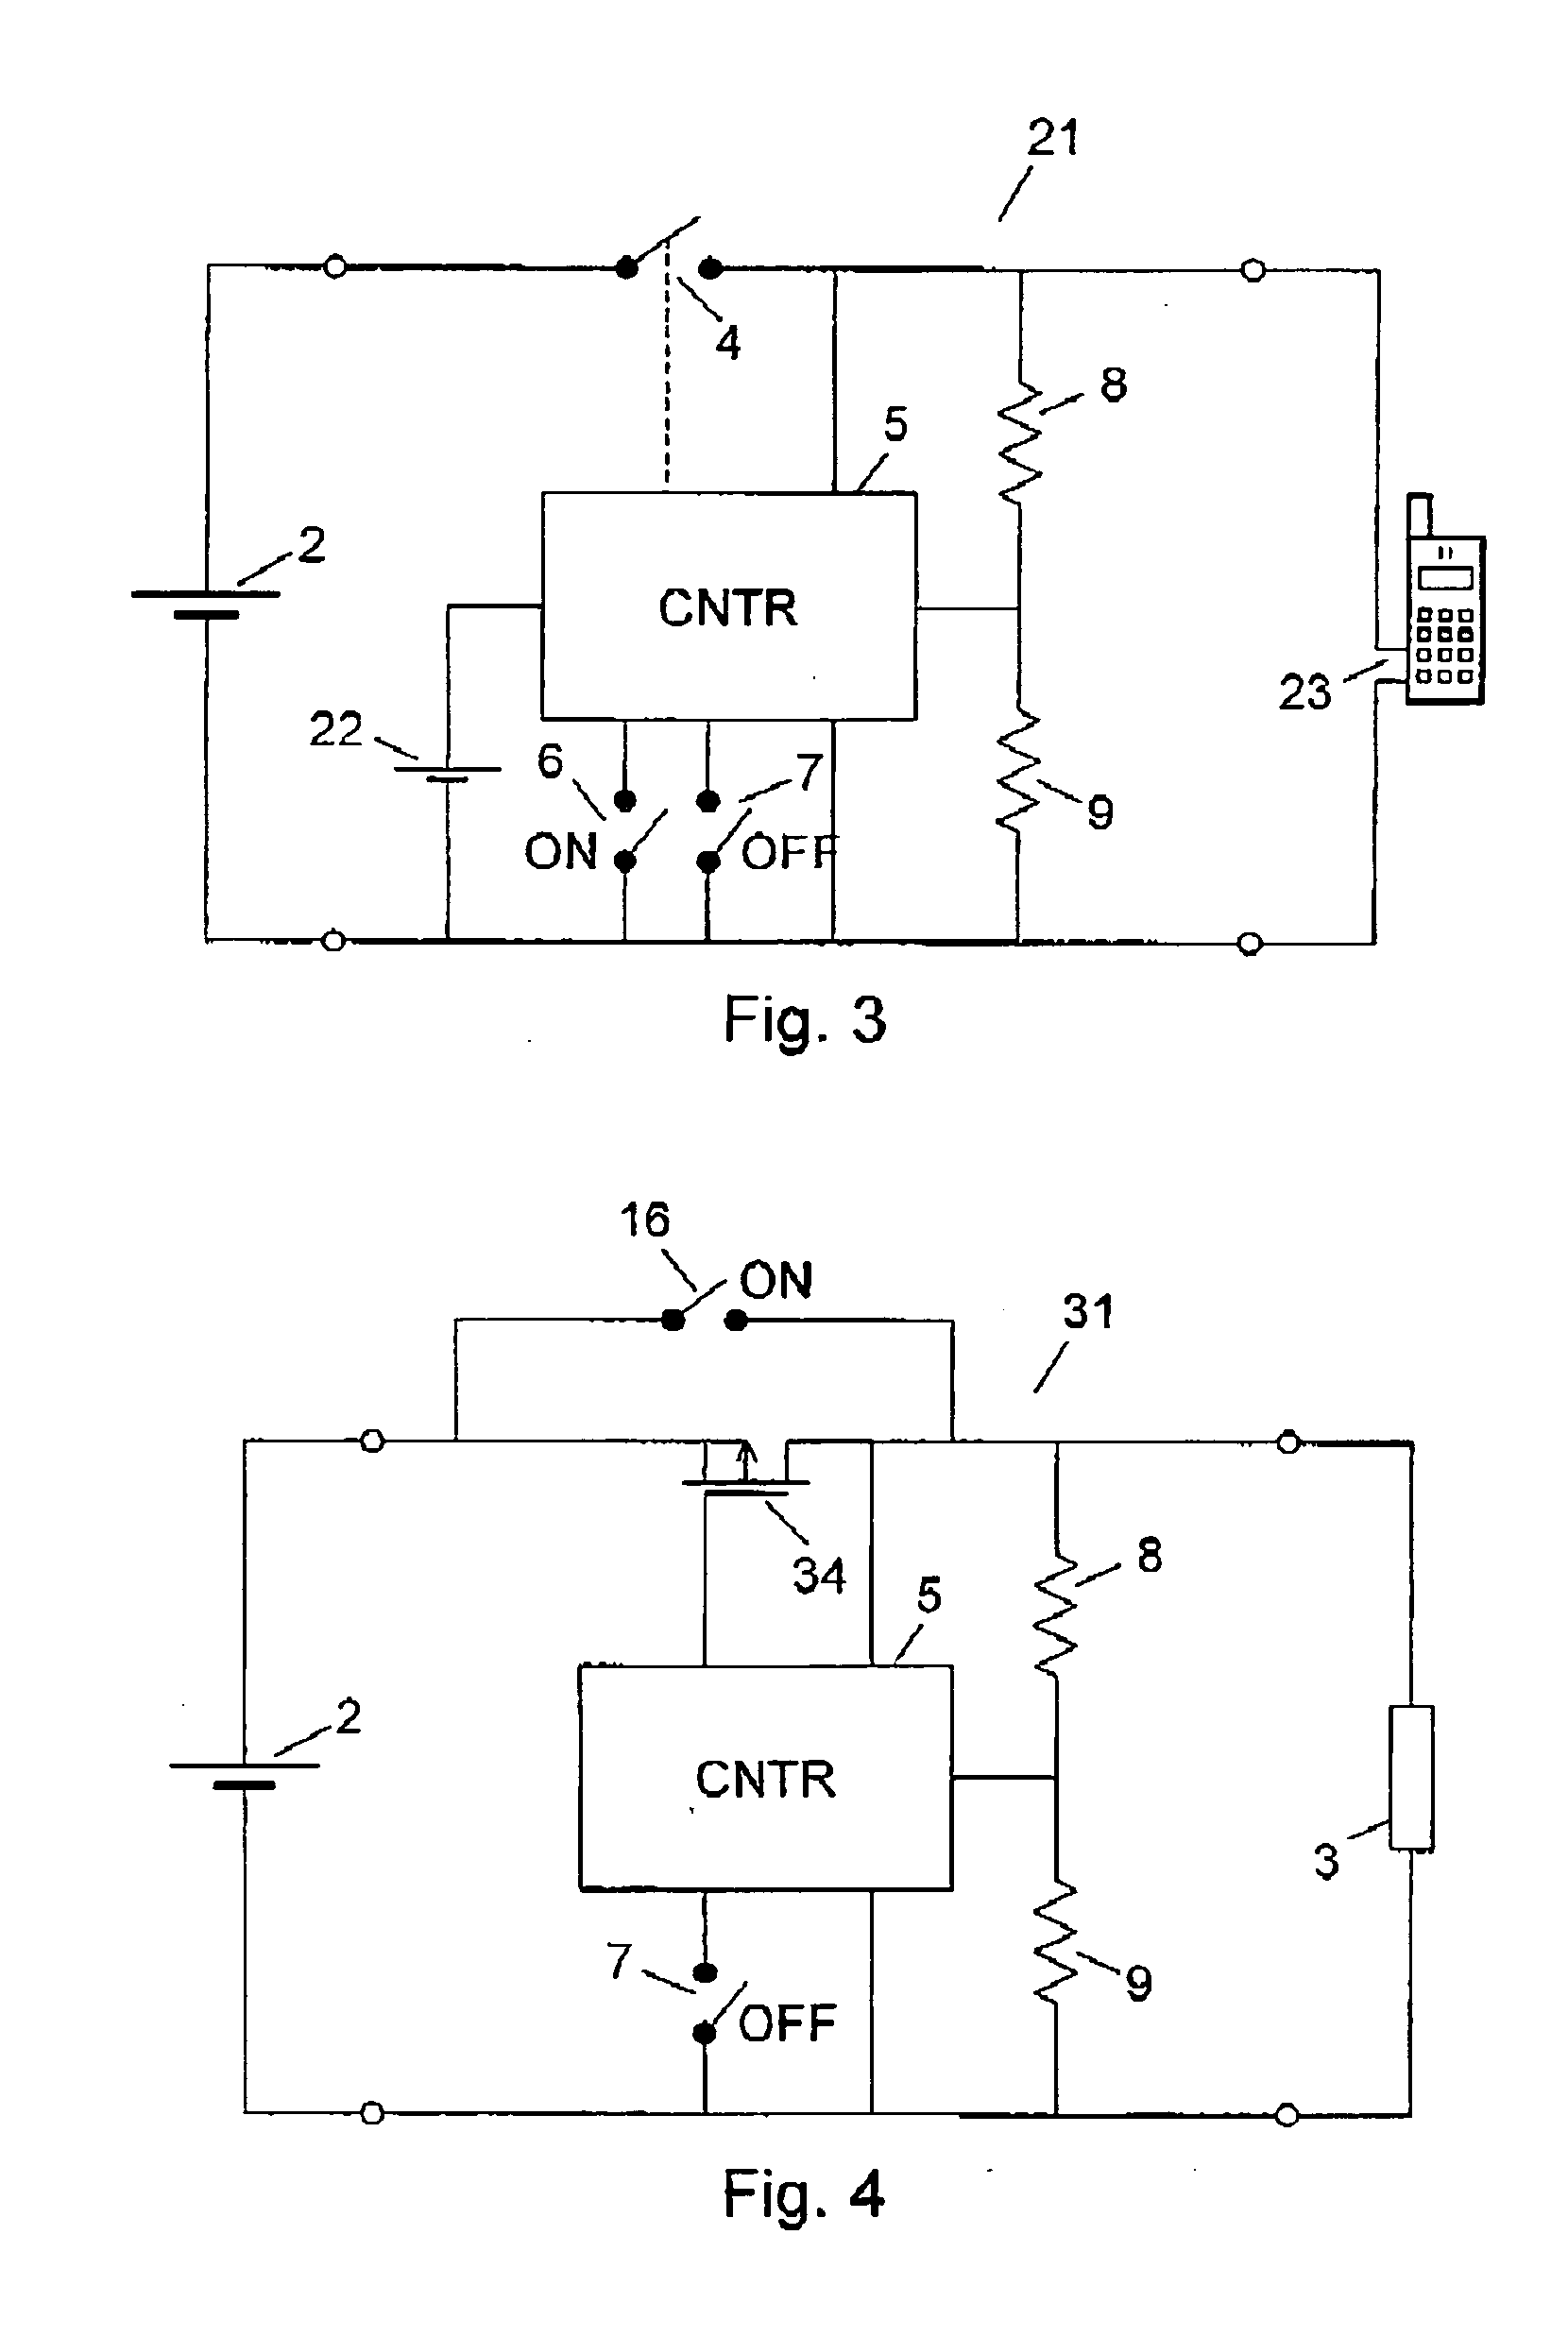 Battery protection circuit